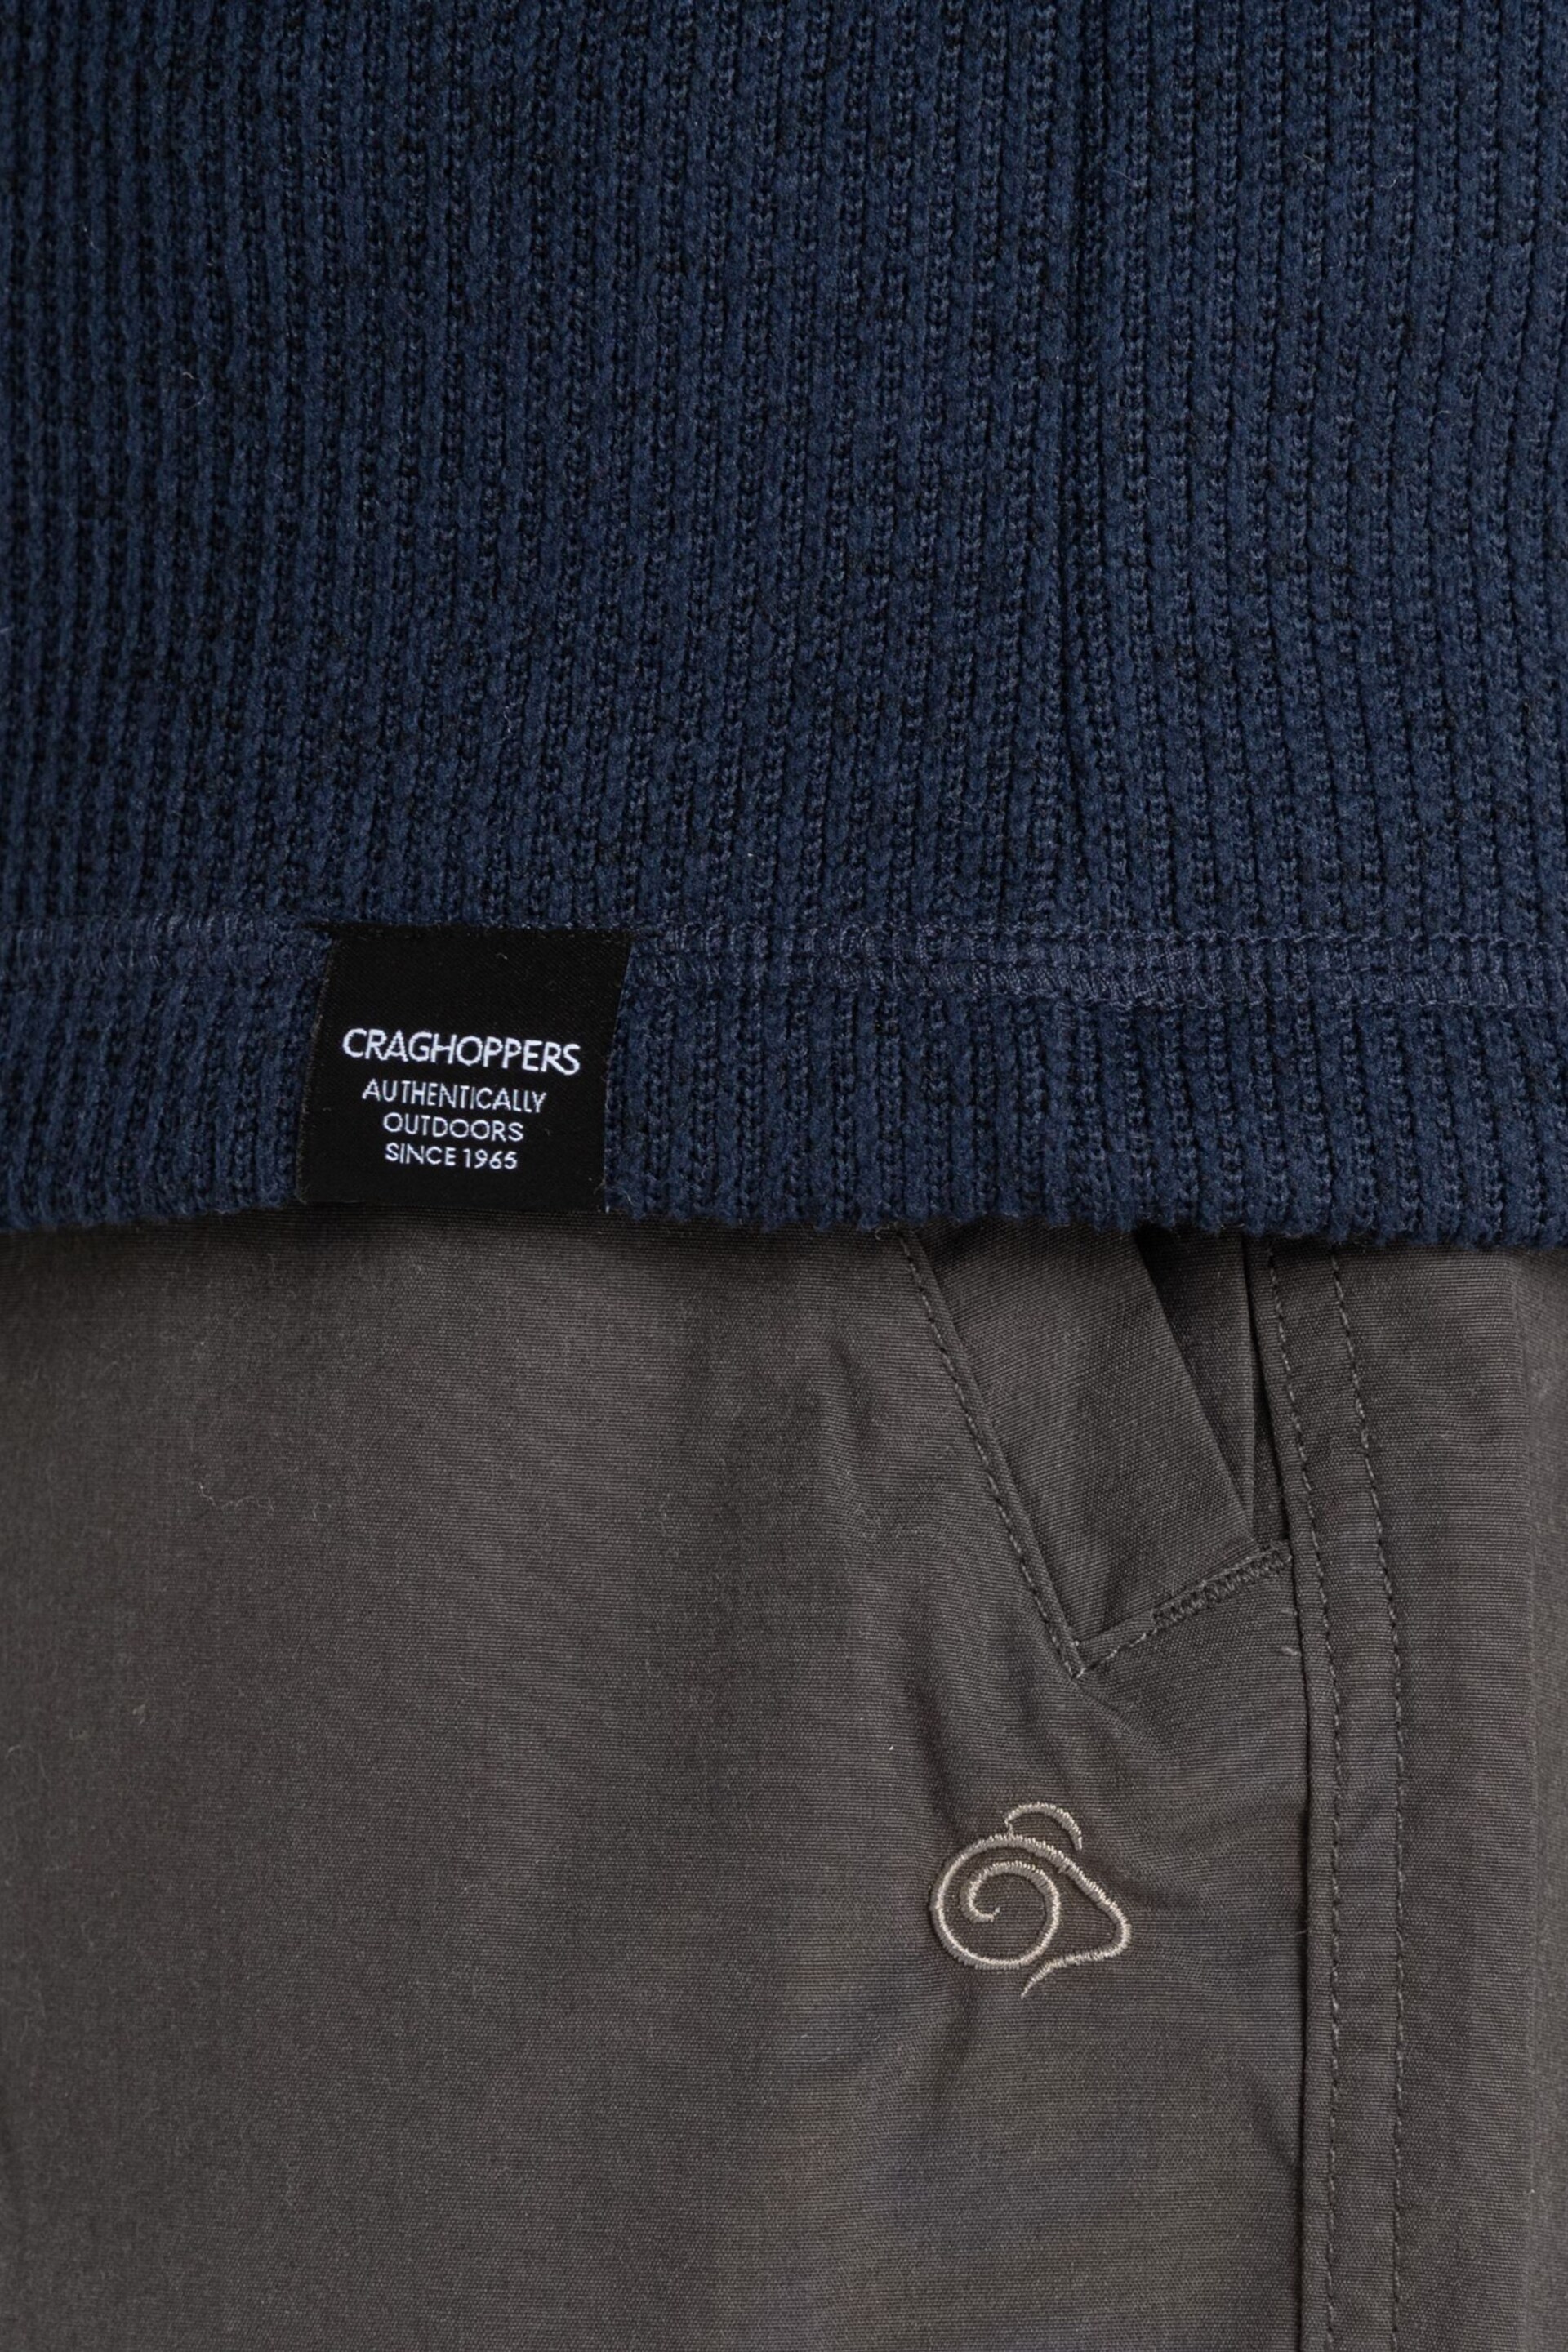 Craghoppers Blue Wole Half Zip Top - Image 7 of 7